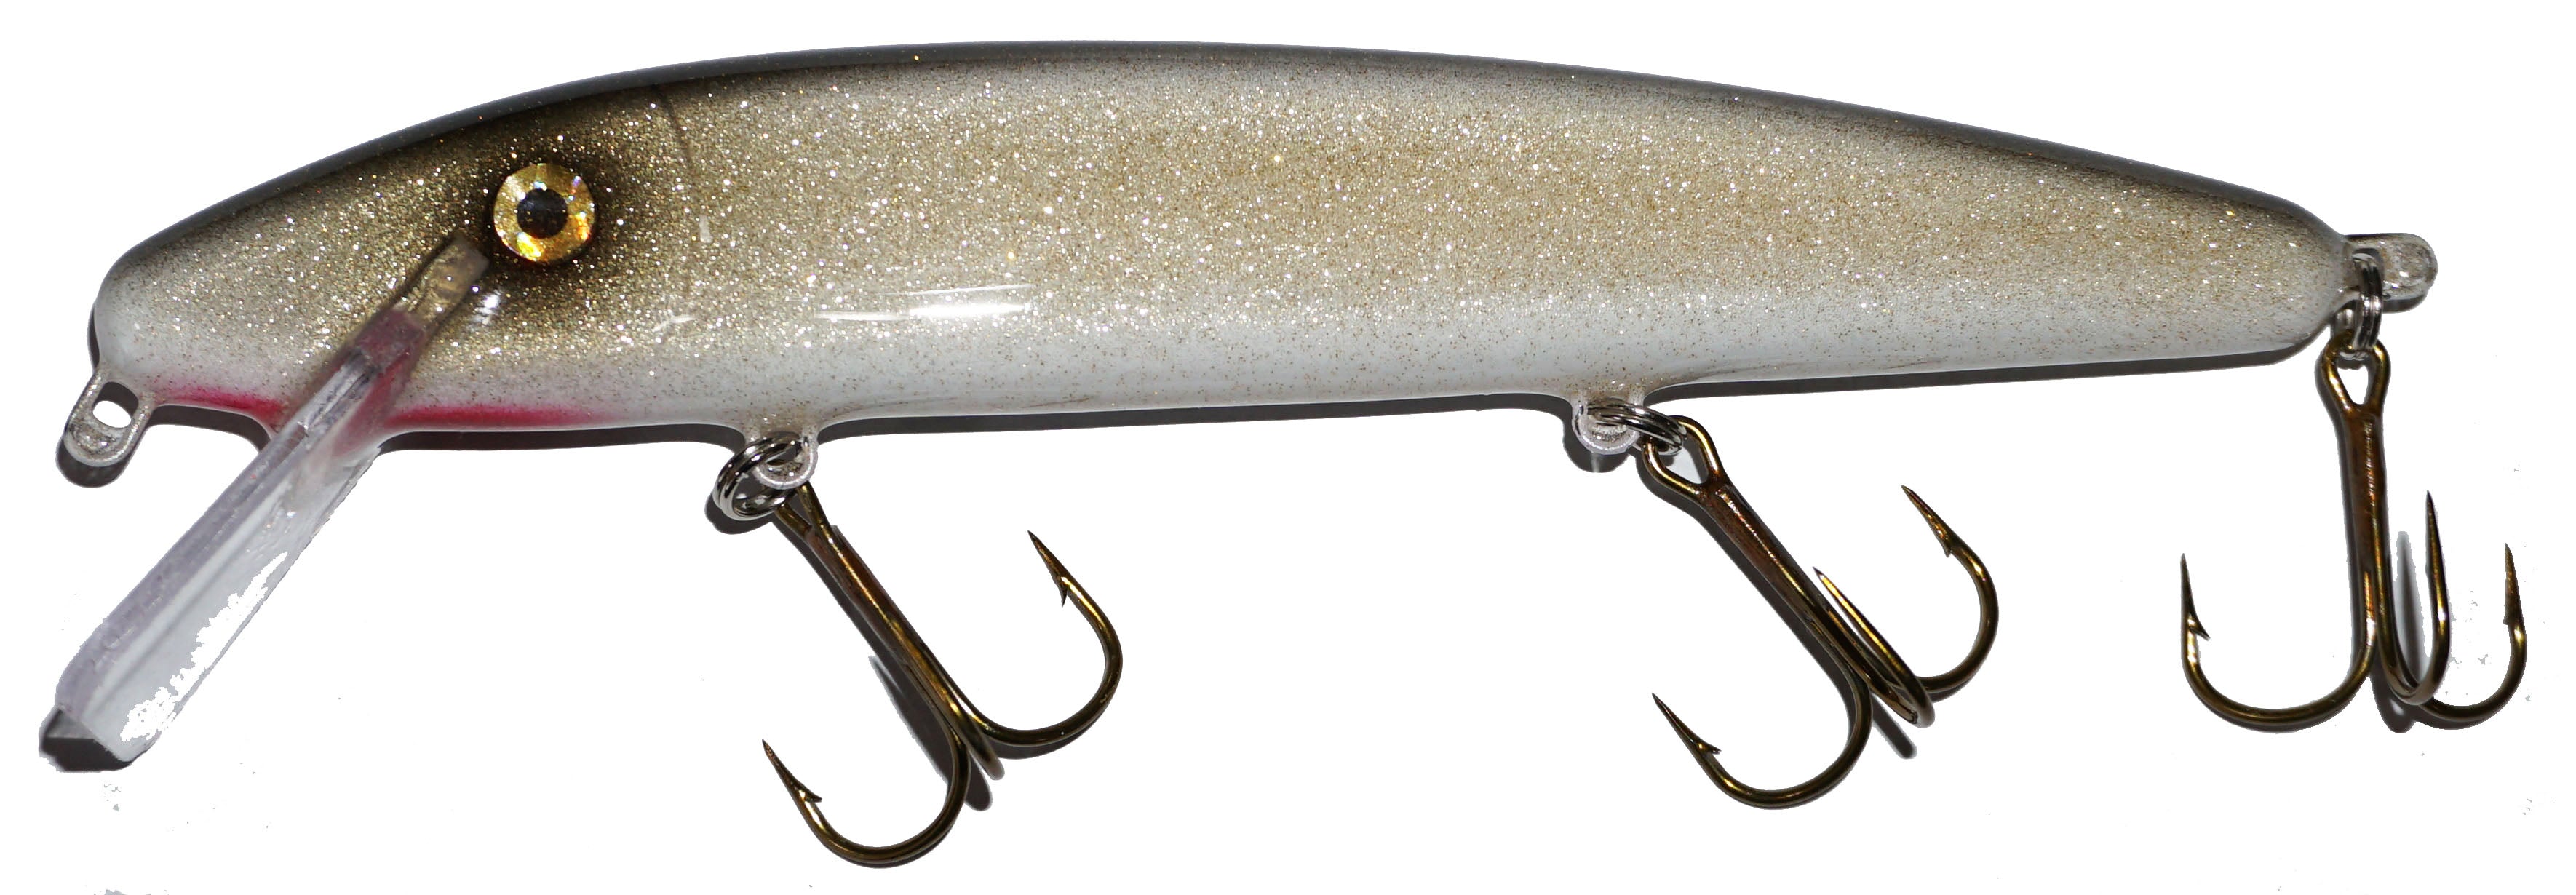  BHtackle 3 New 7 INCH Musky Muskie Lures CRANKBAIT